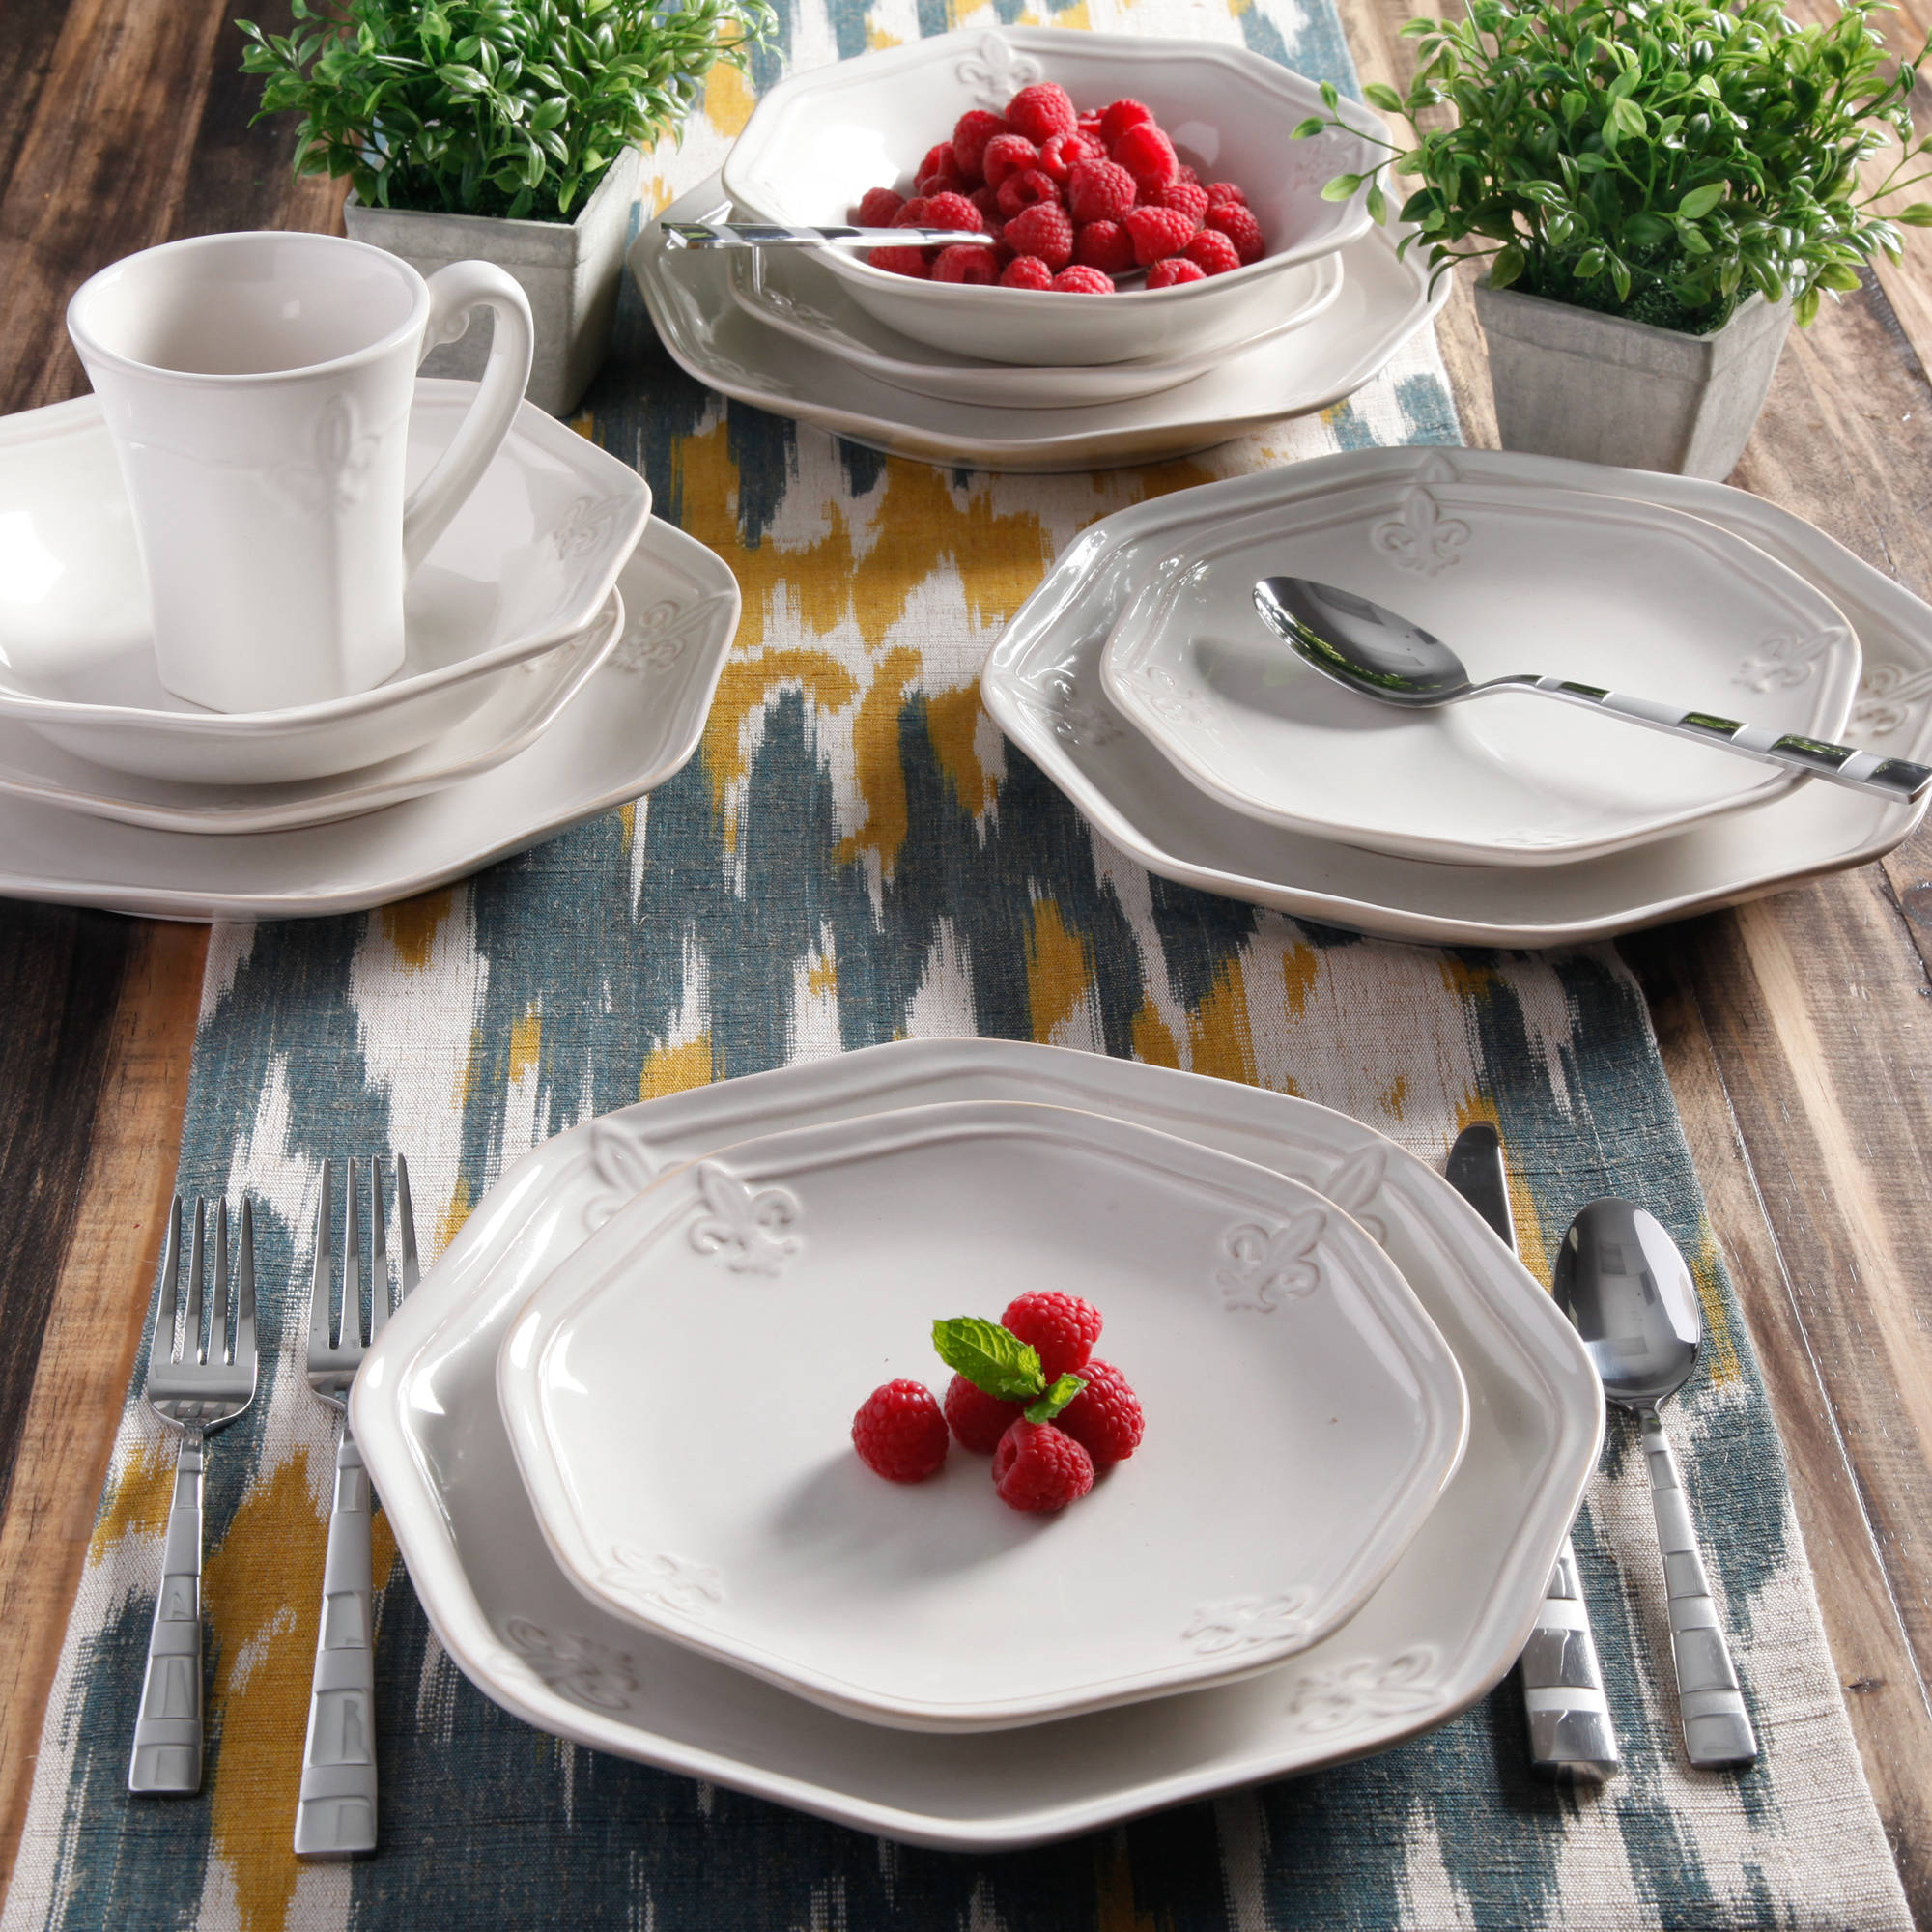 Better Homes & Gardens Country Crest Dinnerware, Set Of 16 - image 2 of 8